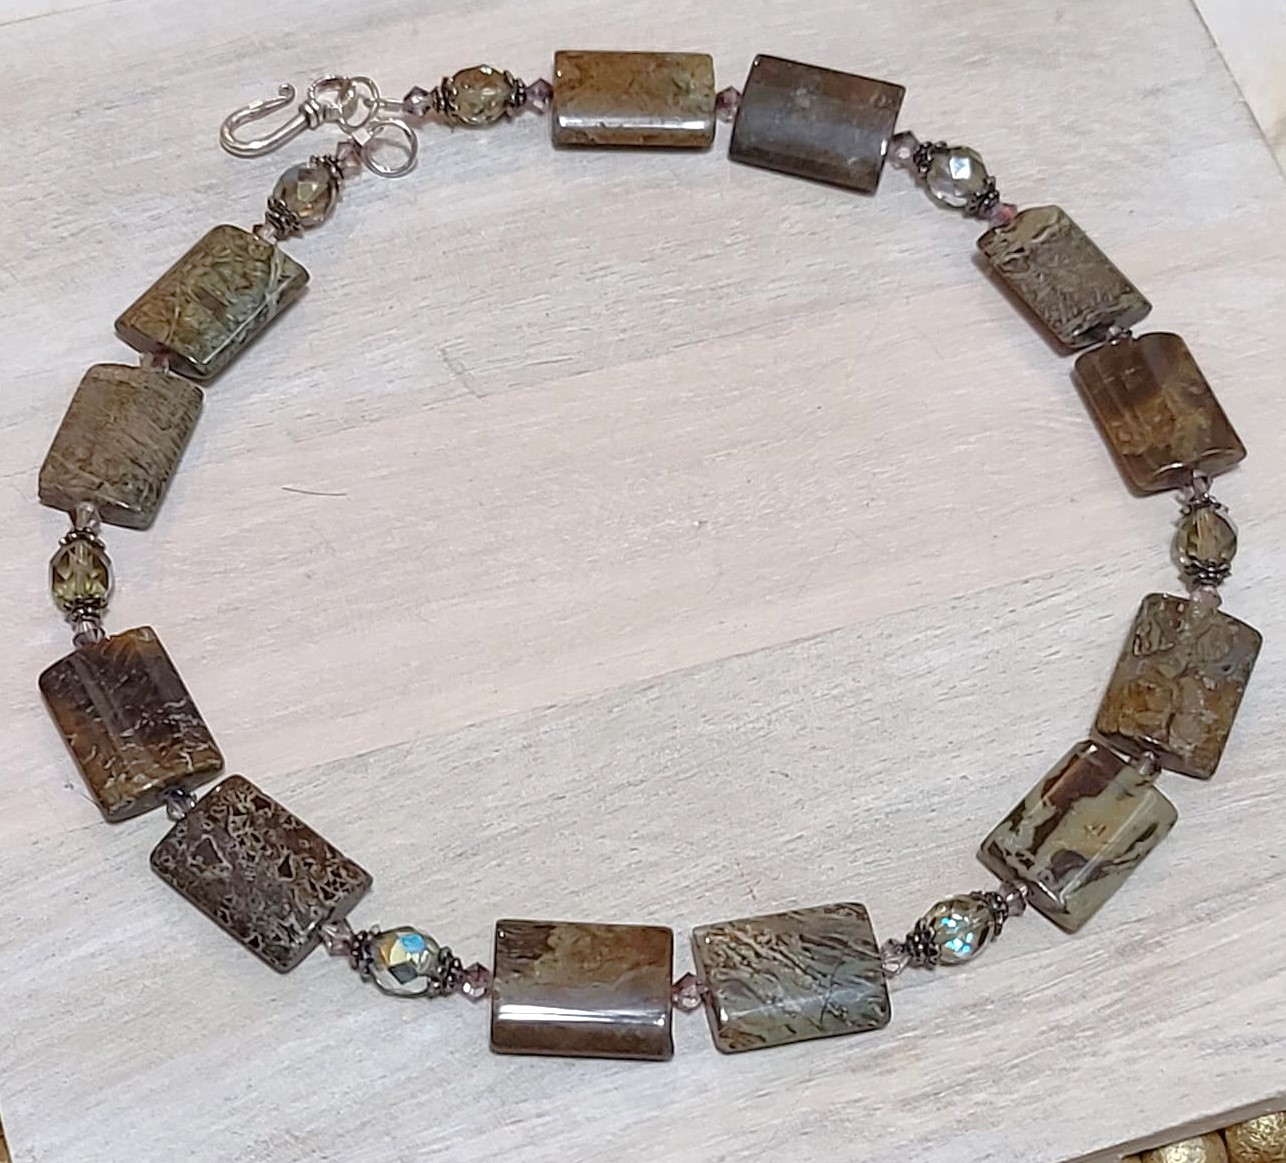 Gemstone link necklace, green jasper, austrian crystals, sterling silver spacers and clasp